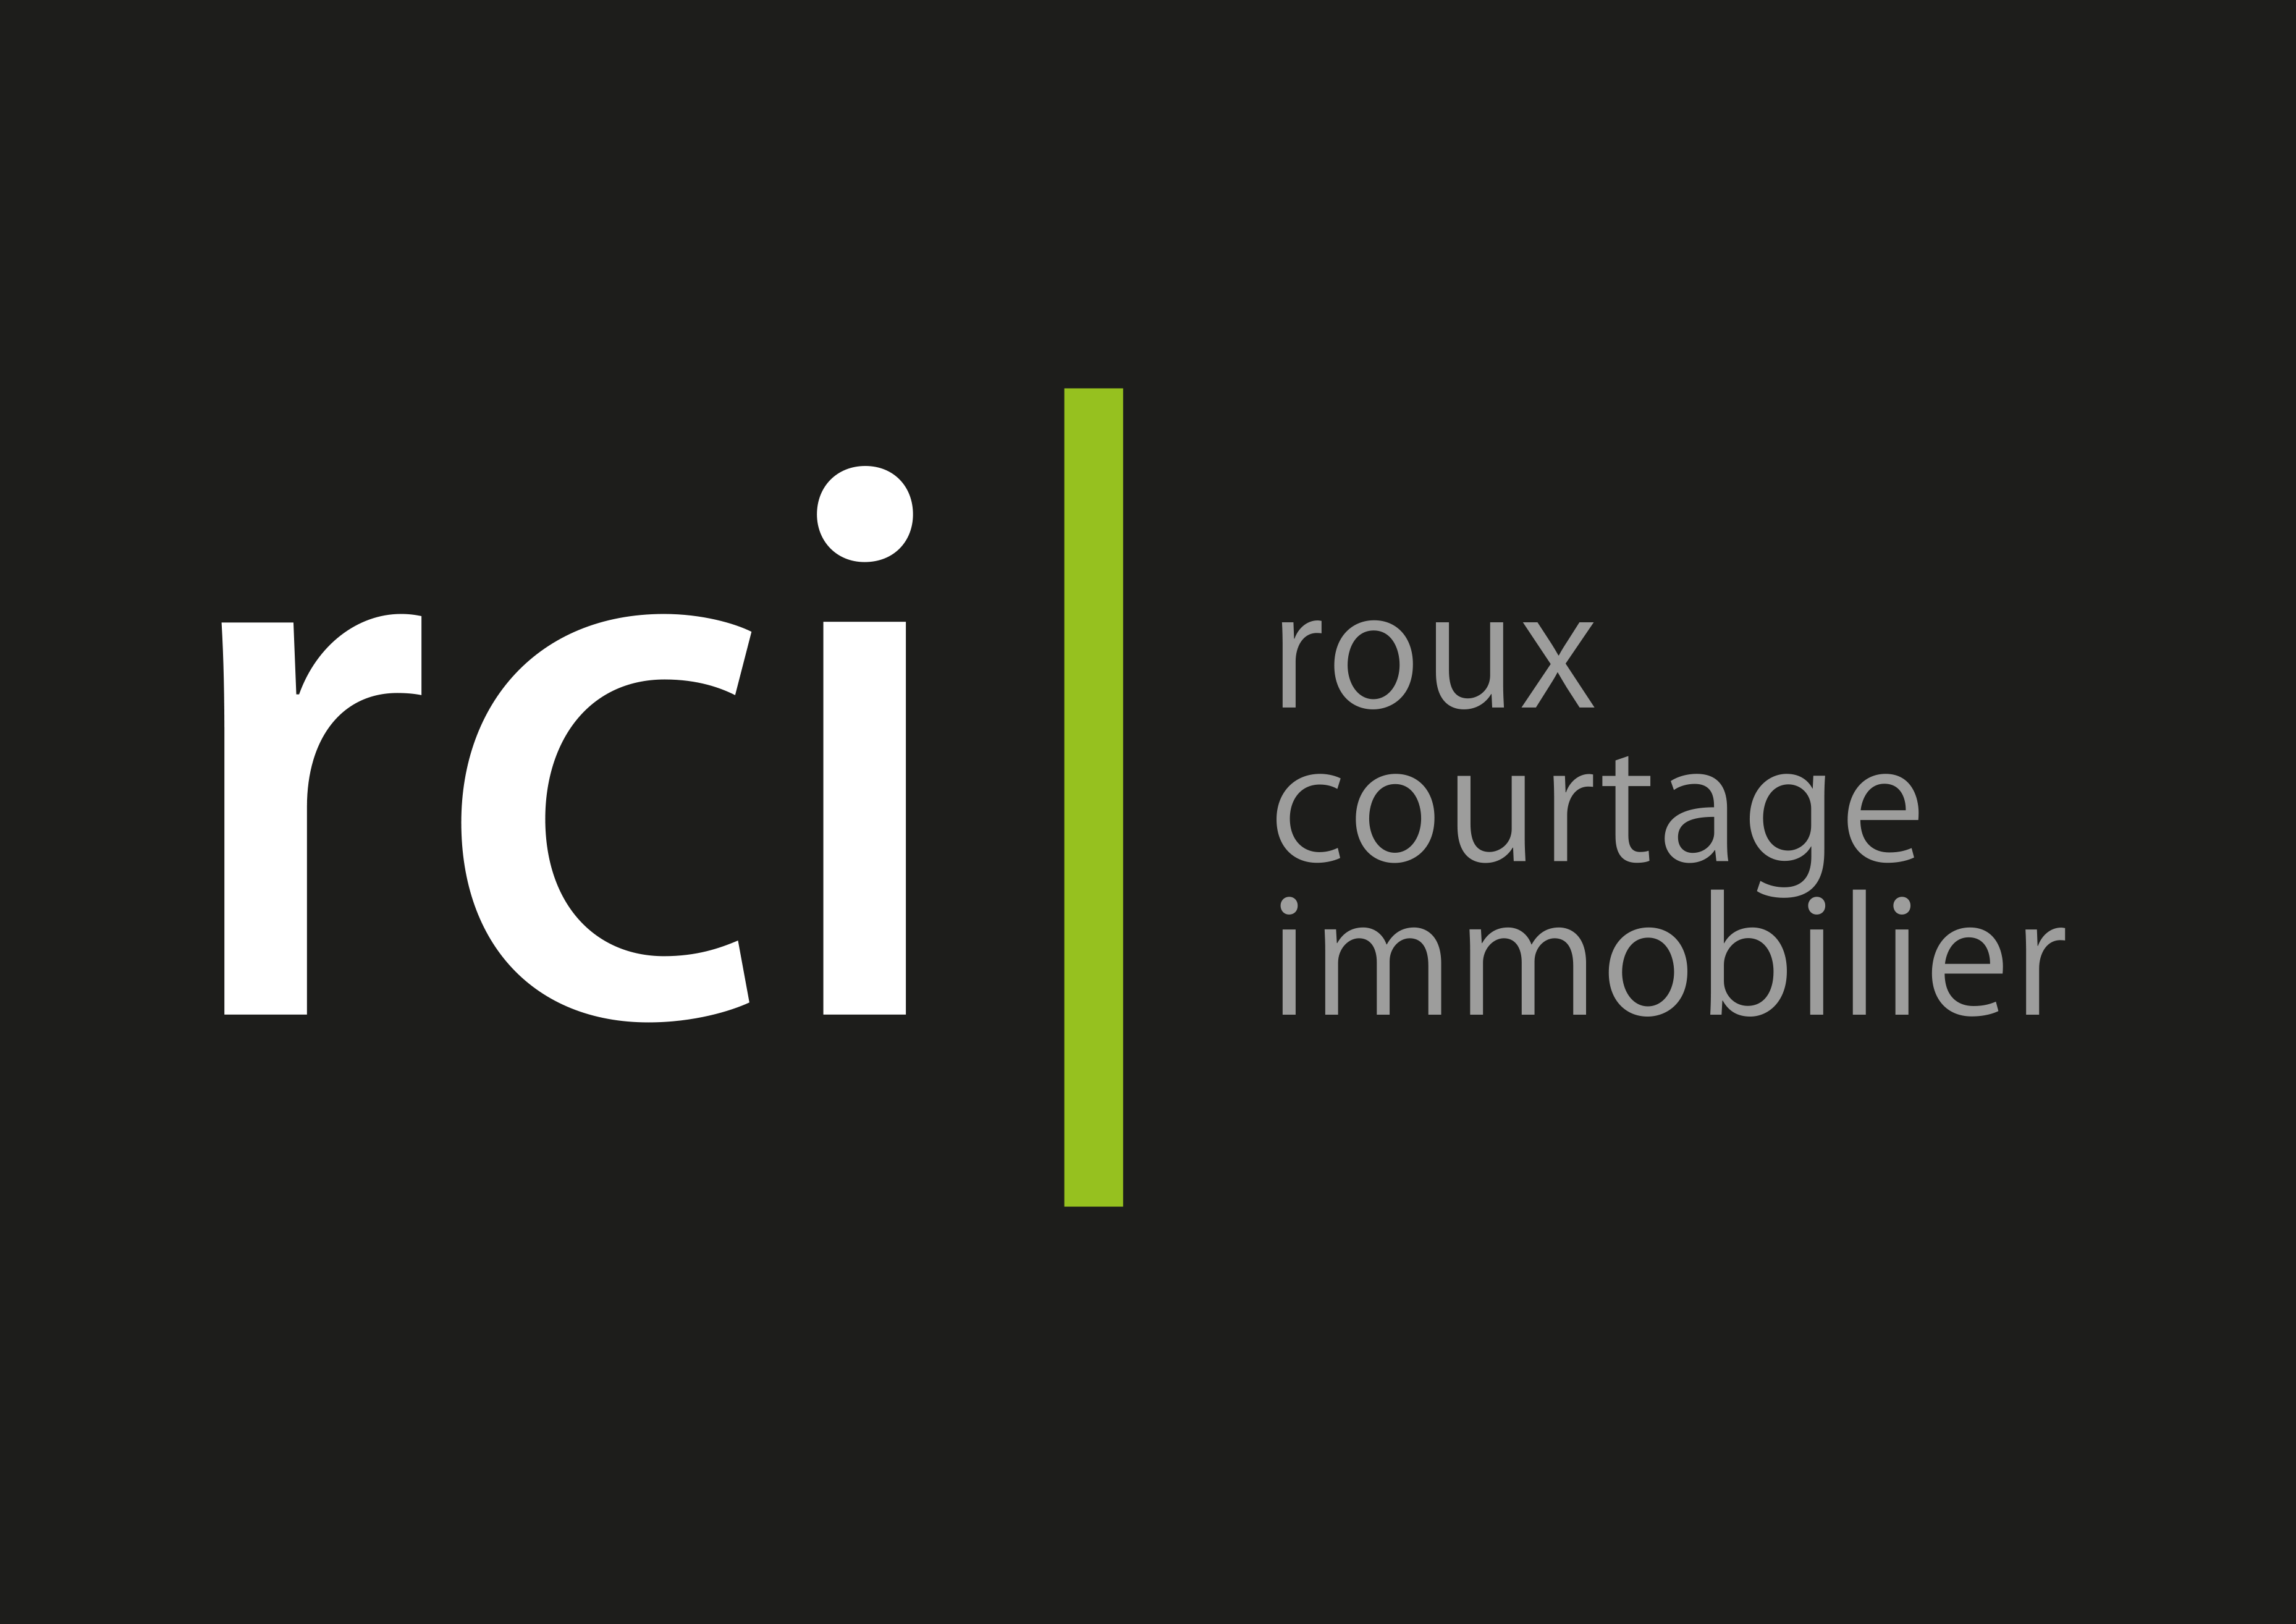 Roux Courtage Immobilier